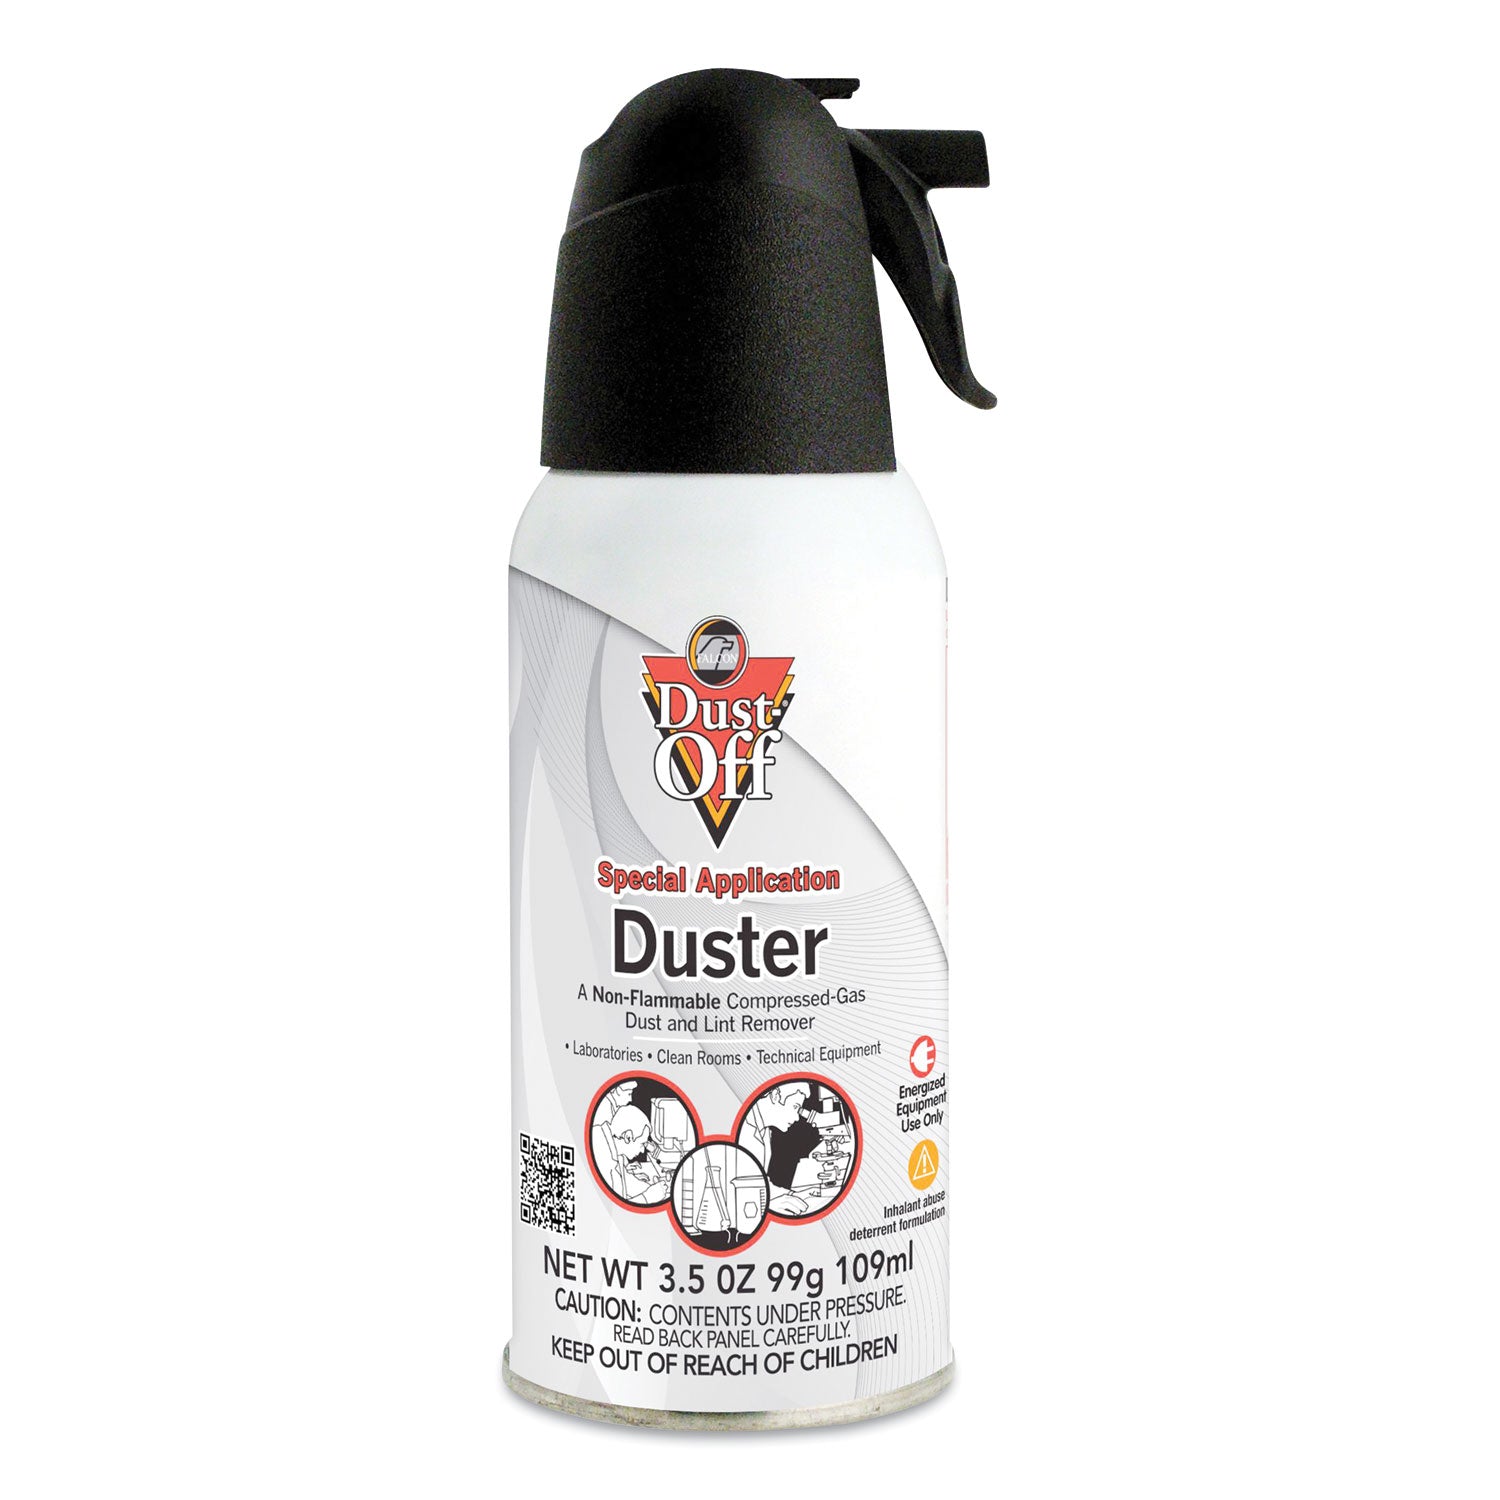 nonflammable-duster-35-oz-can_dofdpnjb - 2